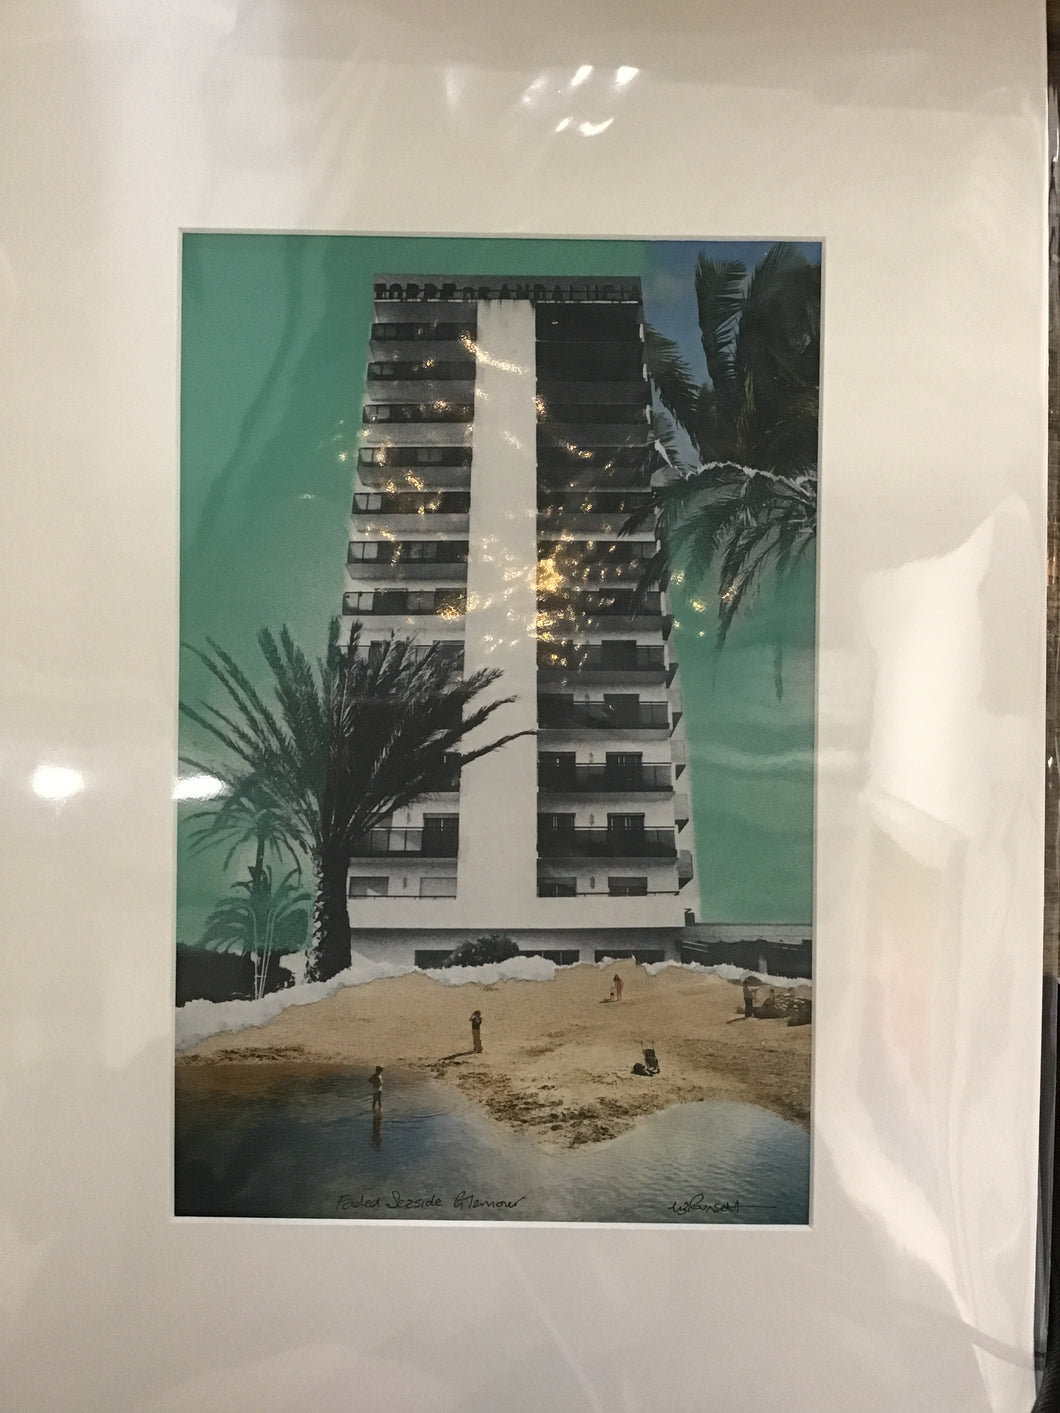 Liz Pounsett - Faded Seaside Glamour Green - Print from a collage